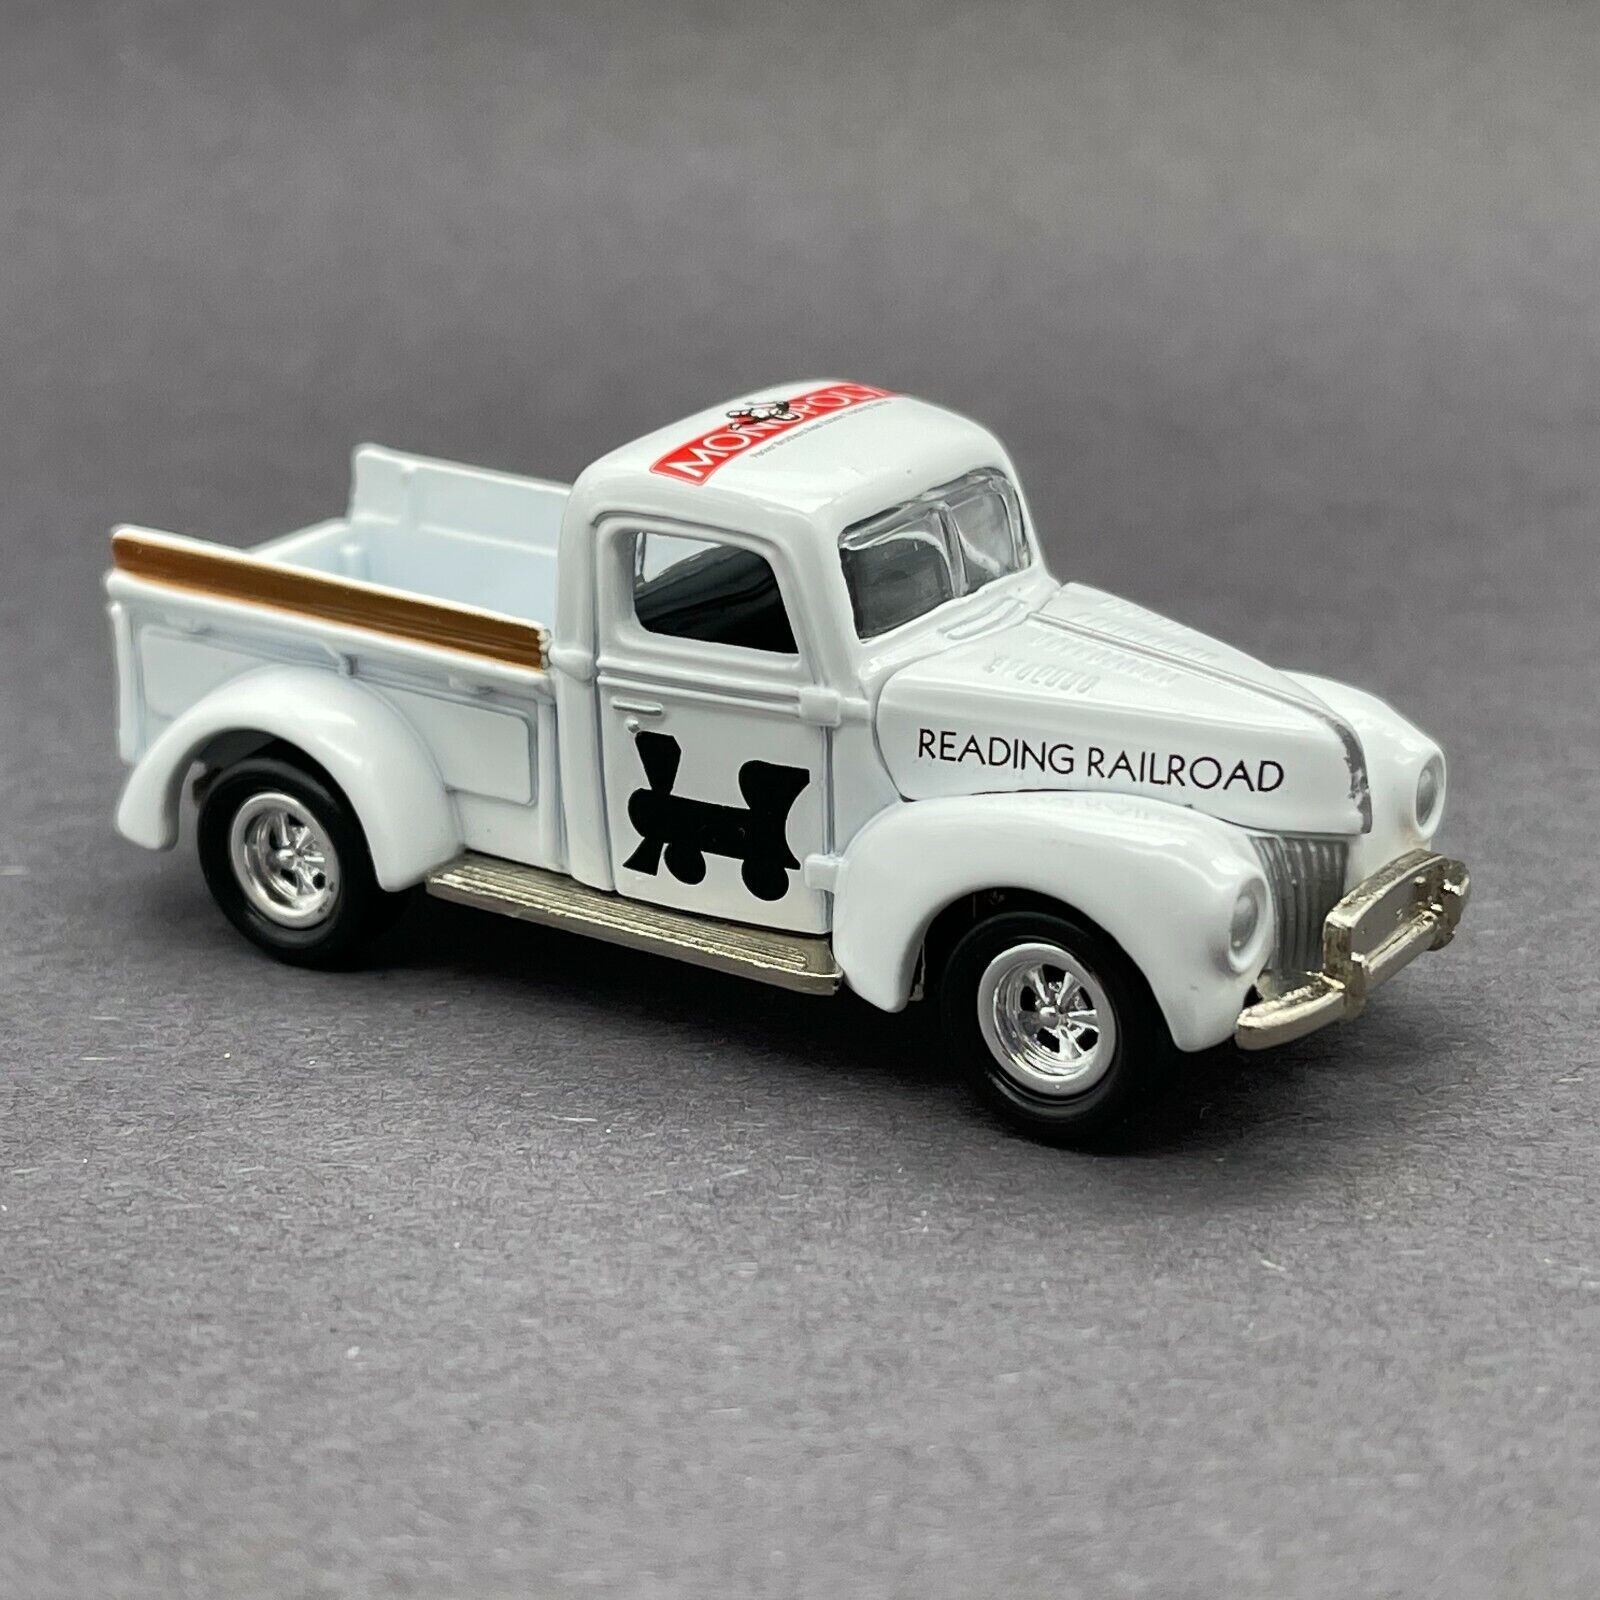 Primary image for Johnny Lightning Monopoly Reading Railroad 1940 '40 Ford Pickup Truck 1/64 Loose